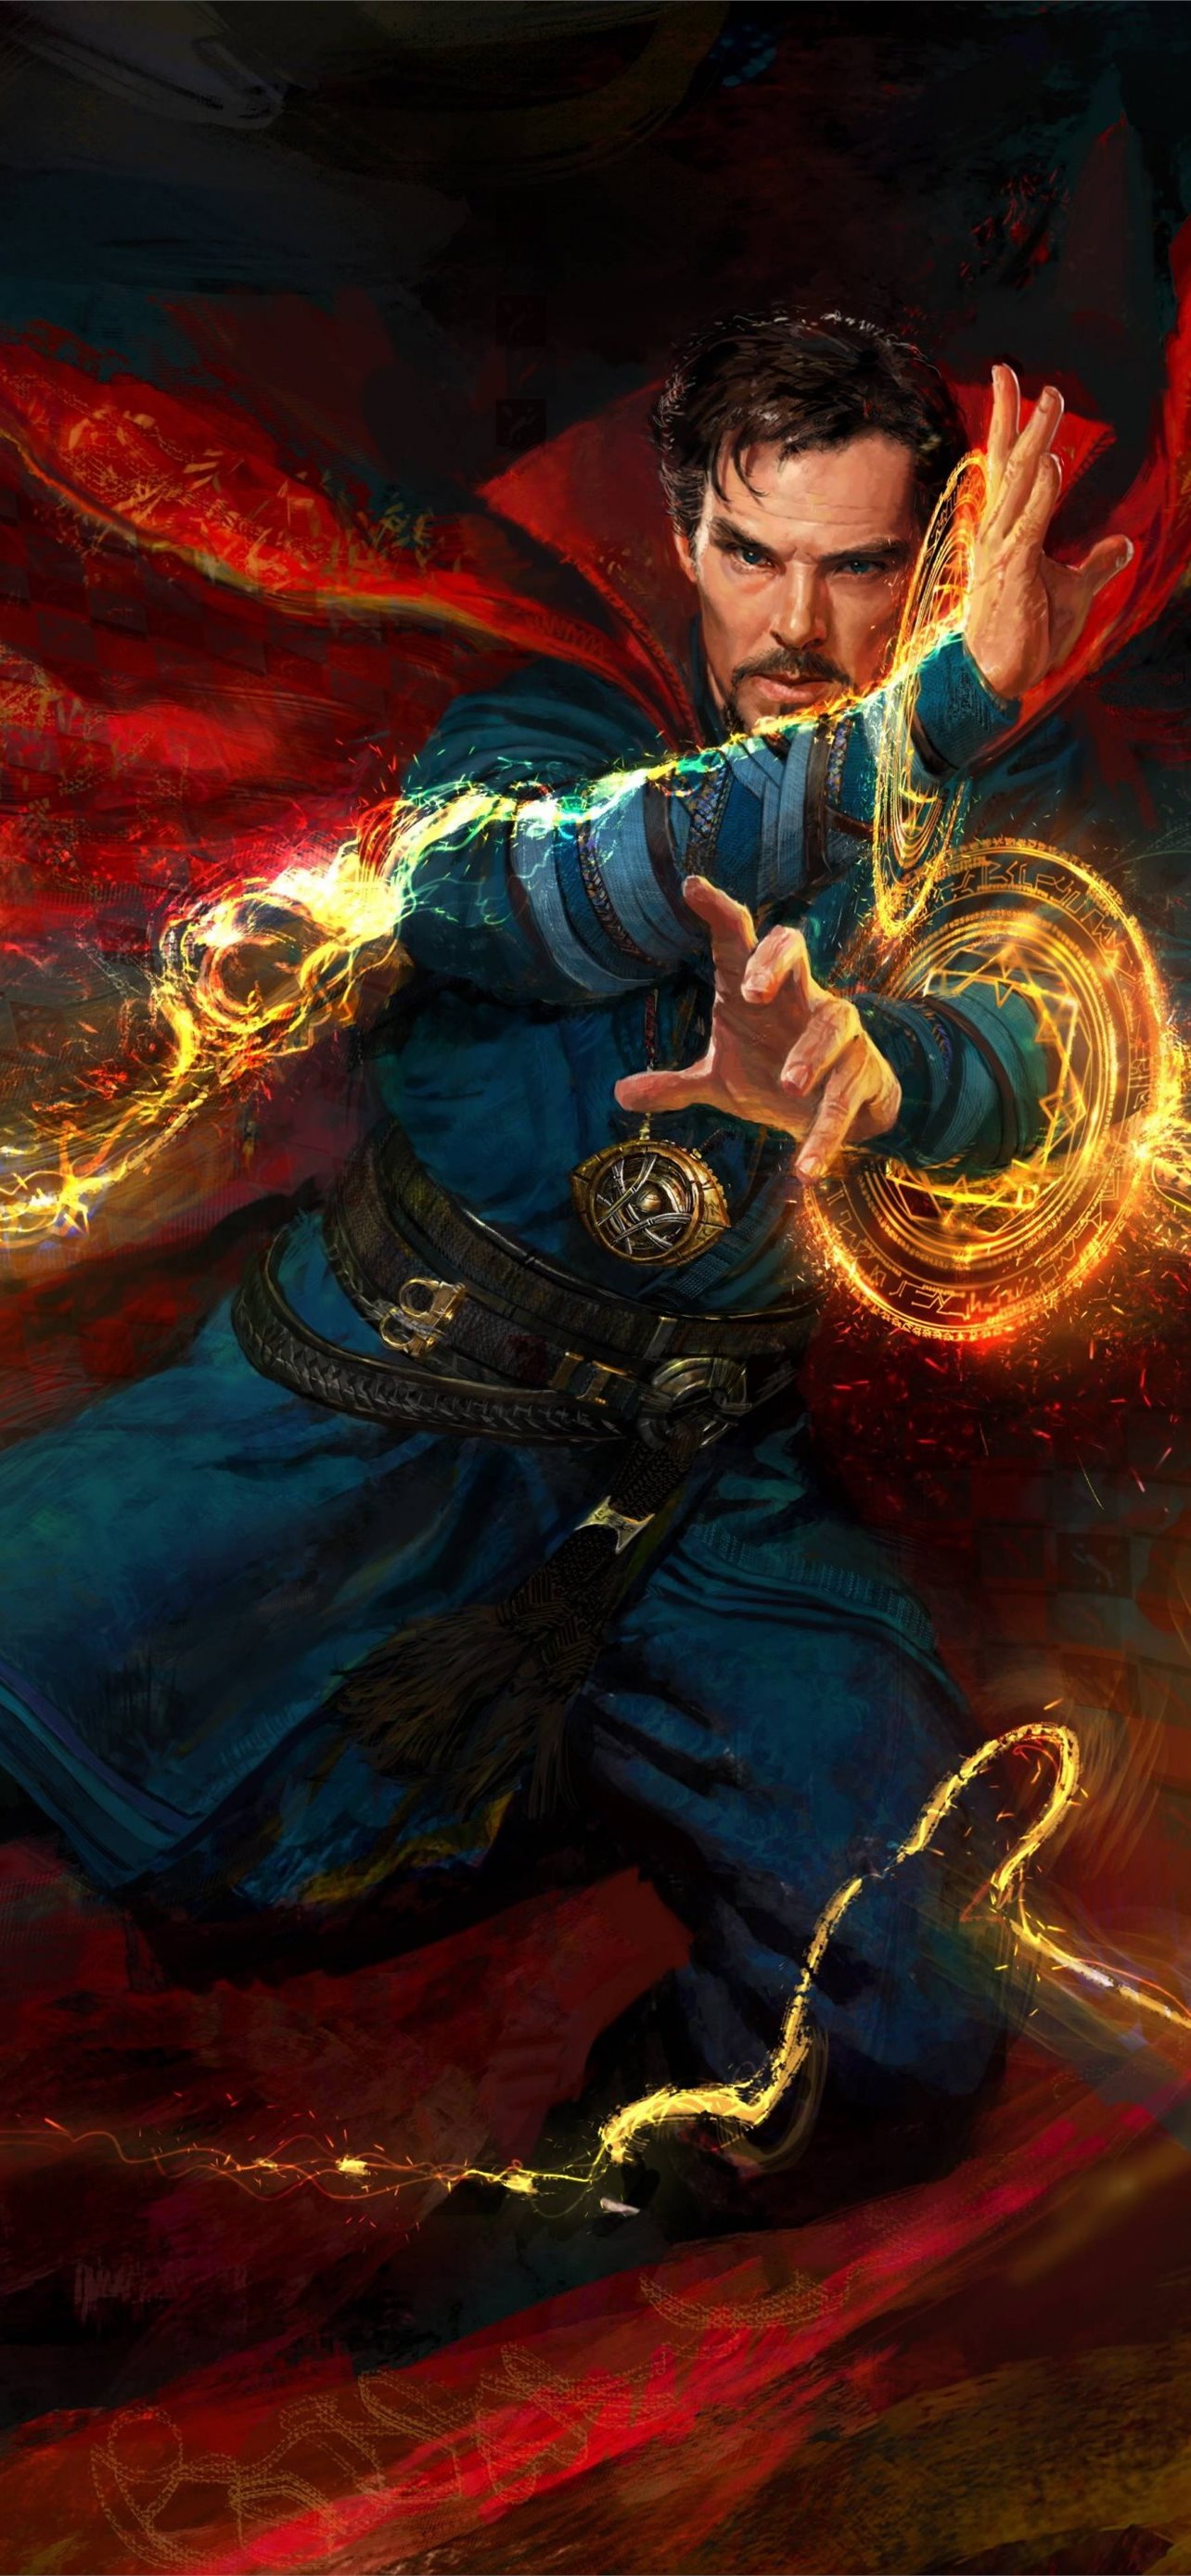 Download wallpaper 1280x2120 time stone doctor strange marvel comics  iphone 6 plus 1280x2120 hd background 25724